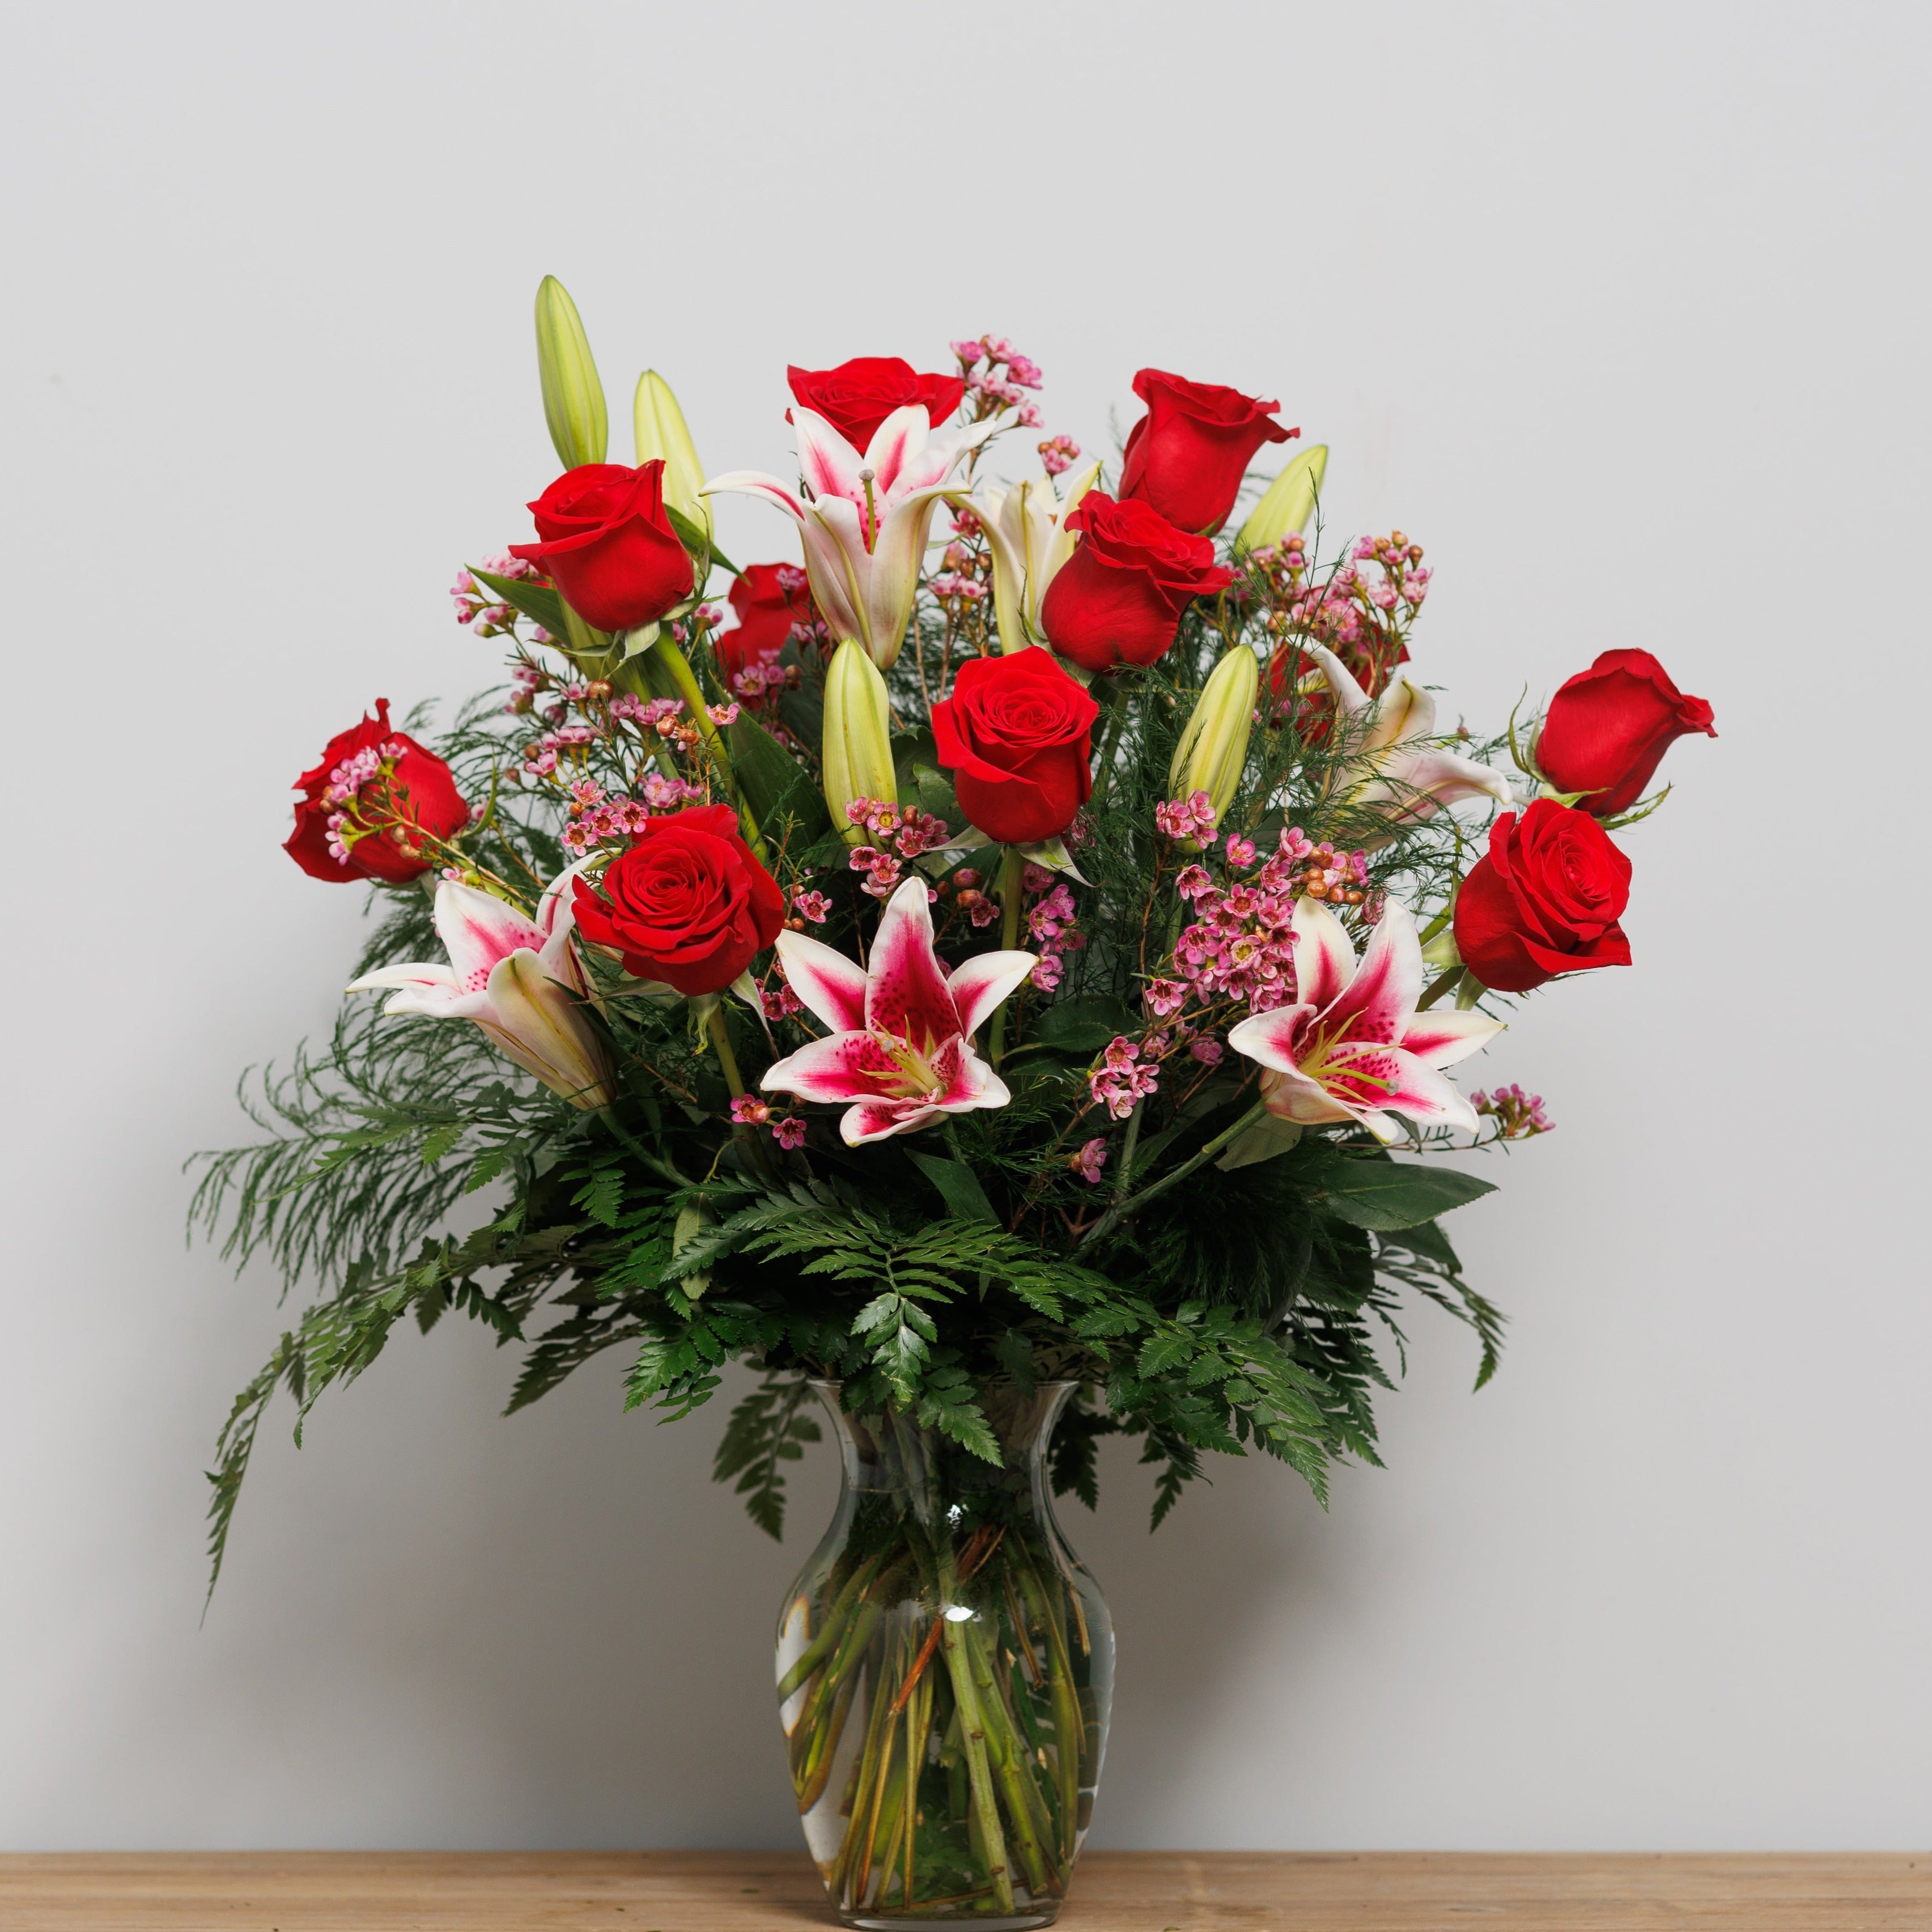 A dozen red roses with stargazer lilies in a vase.